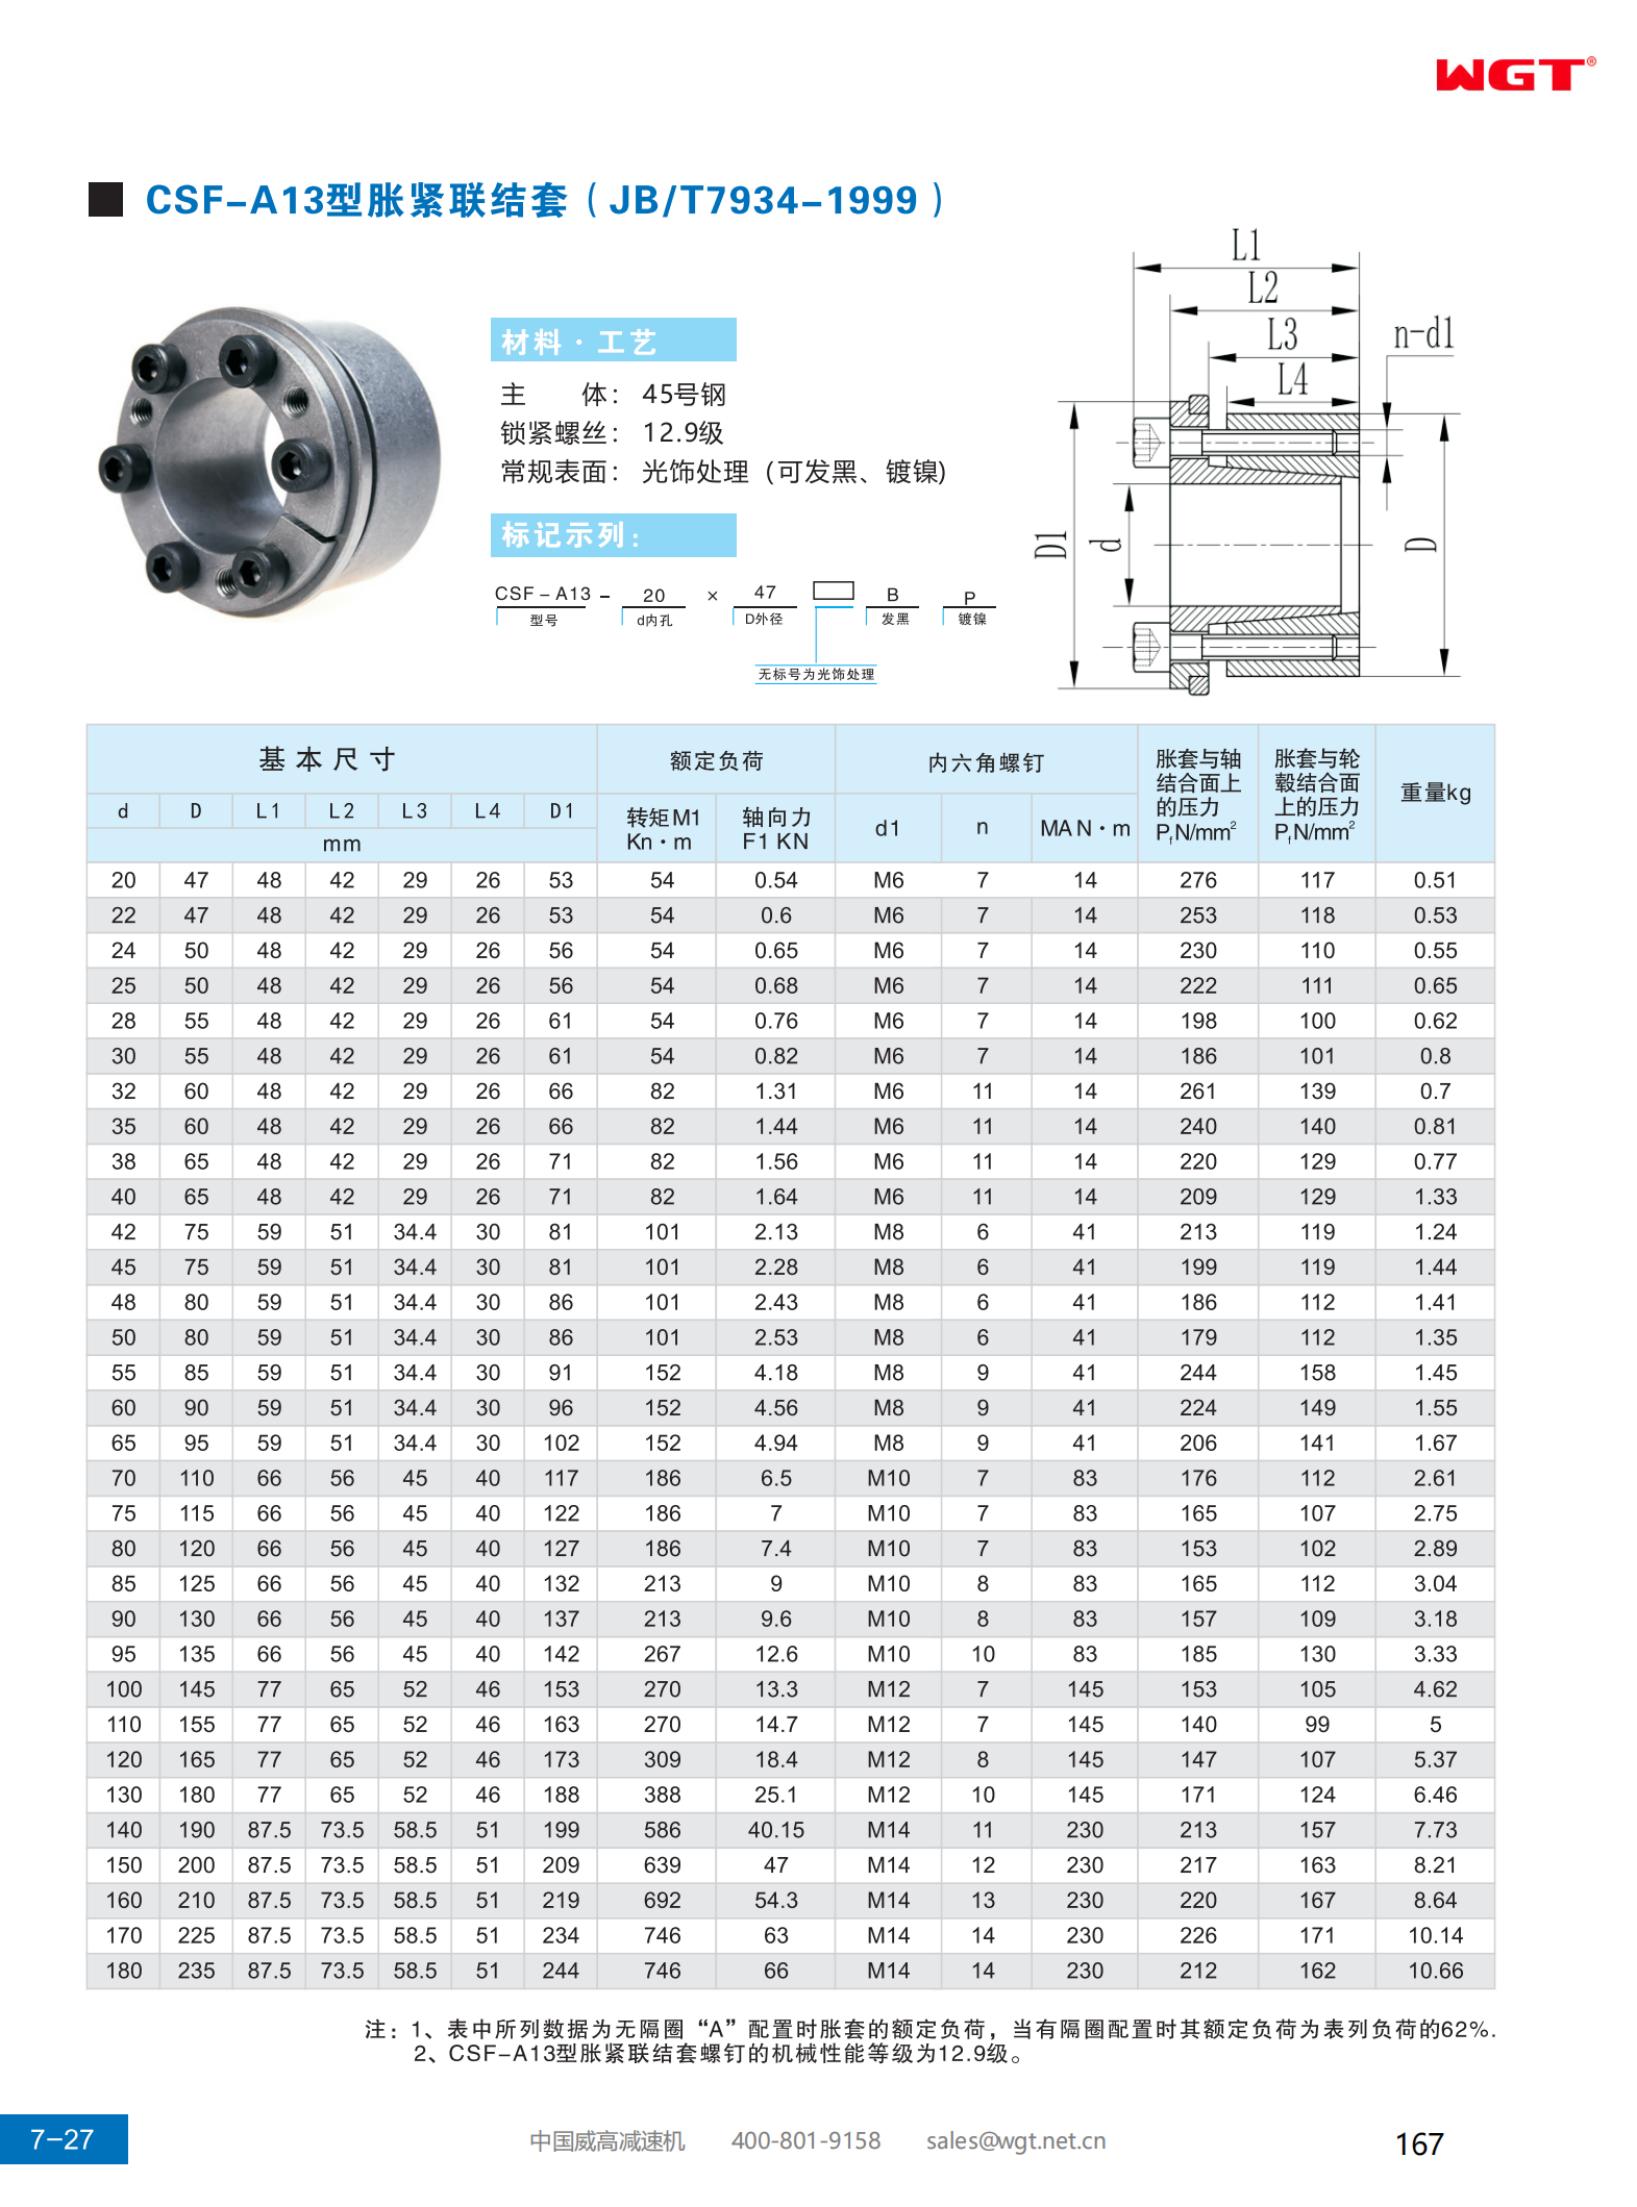 CSF-A13 expansion joint sleeve (JB/T7934-1999)